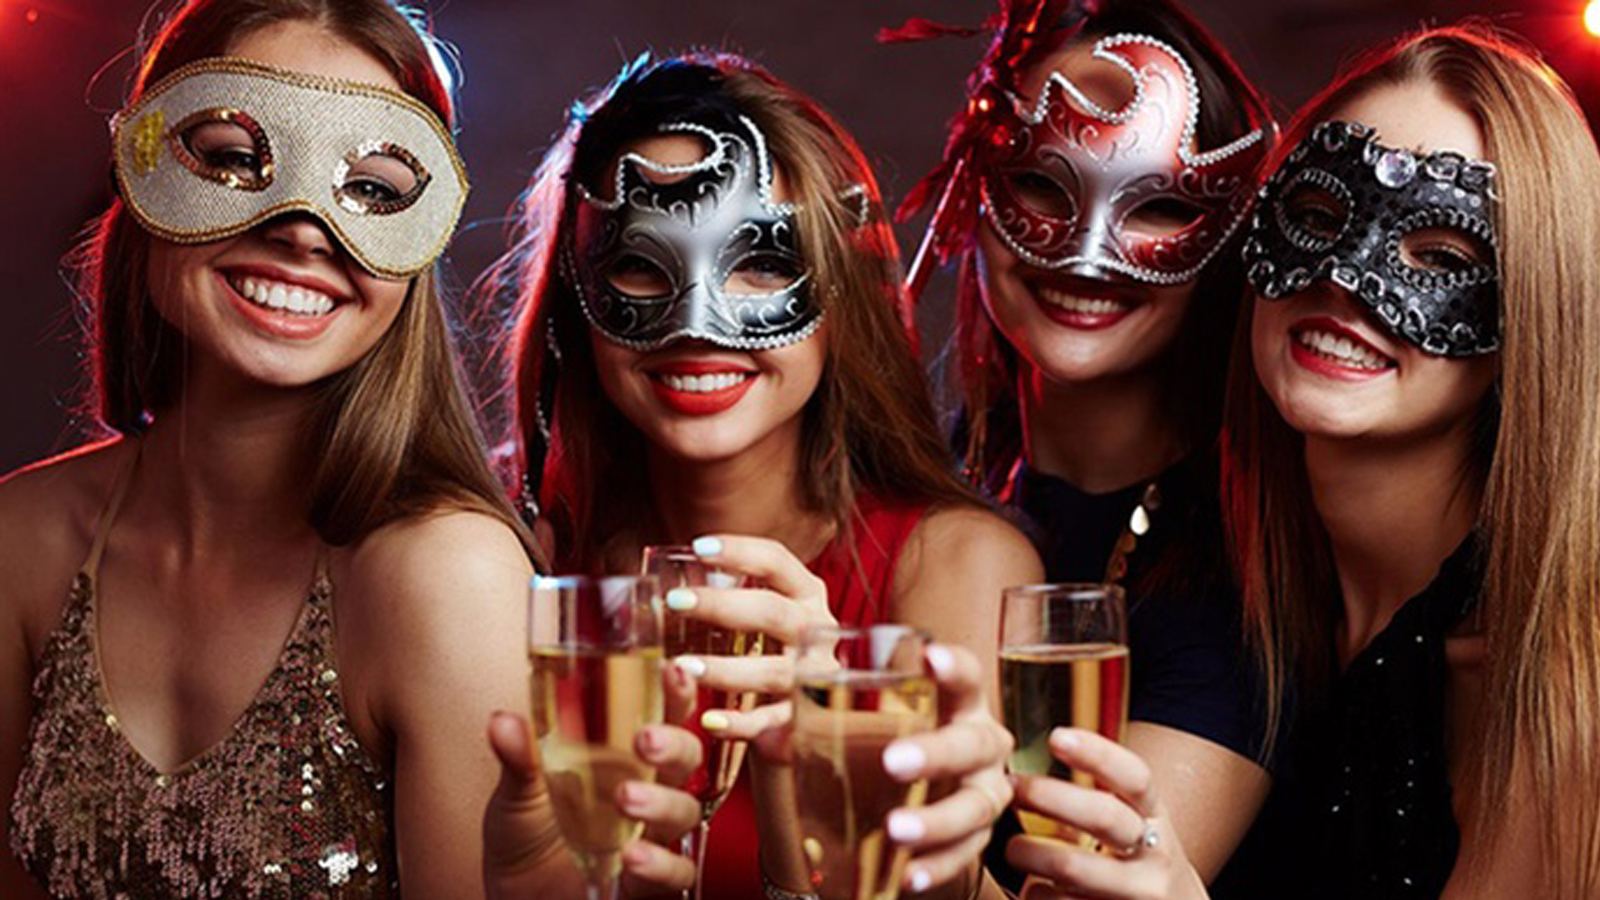 girls wearing masks at a themed event